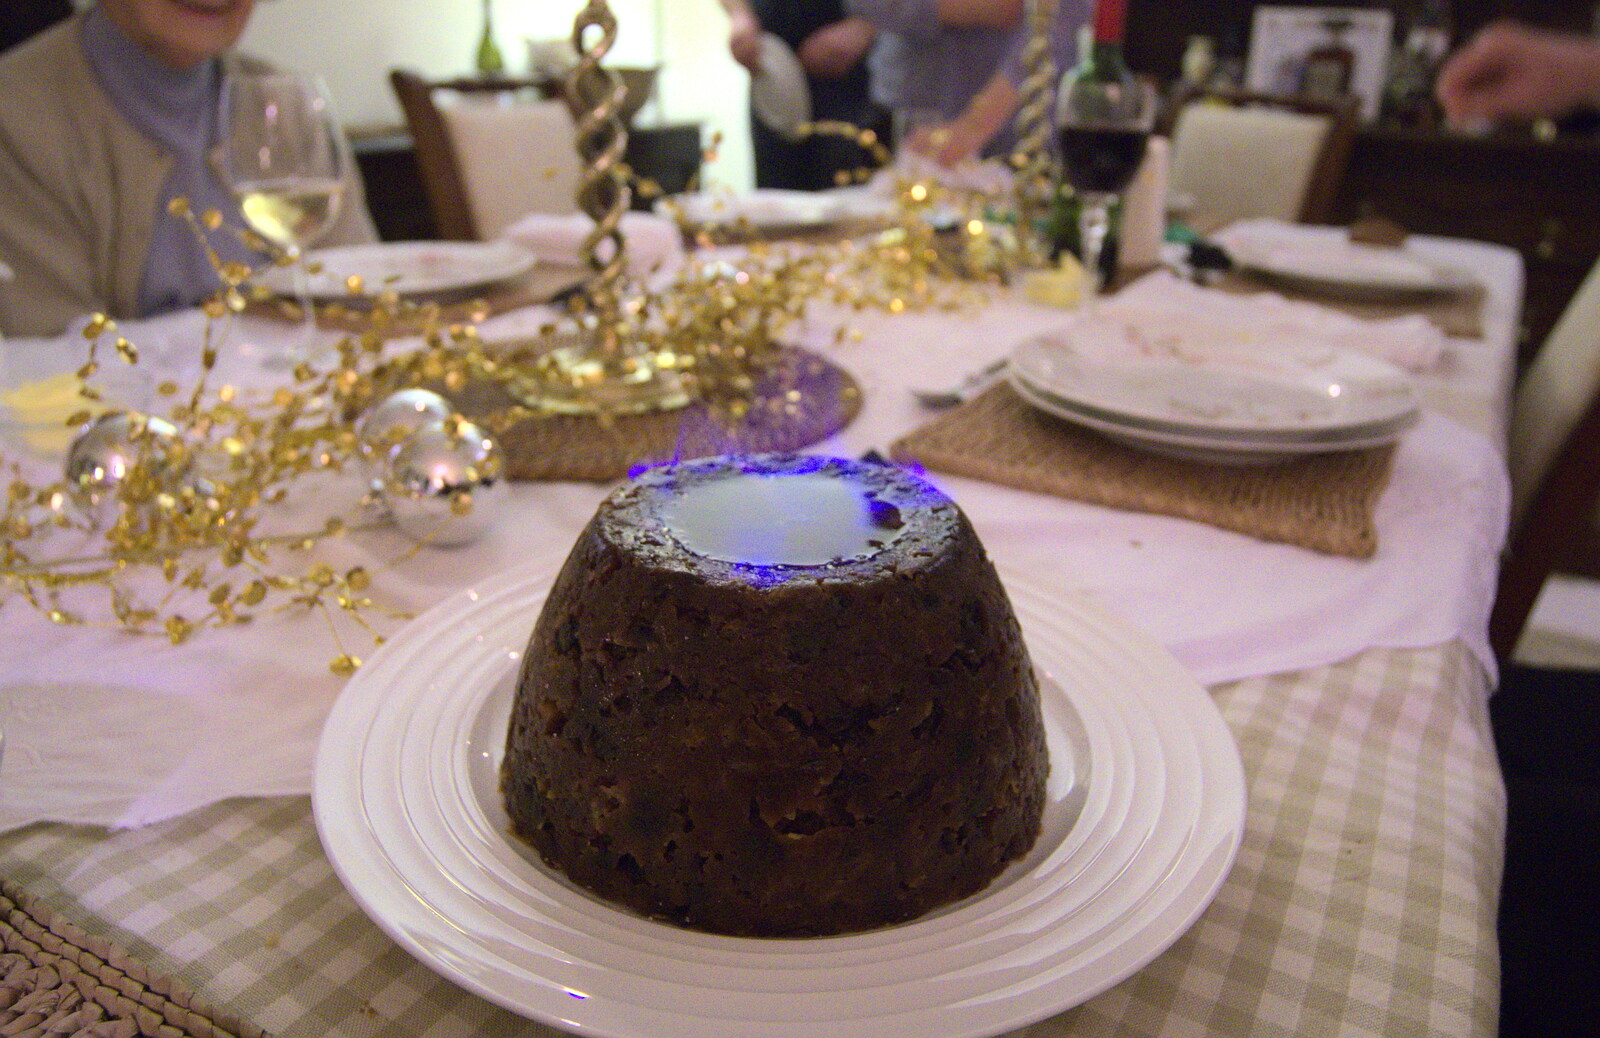 A flaming Christmas pudding from Christmas Day in Spreyton, Devon - 25th December 2012